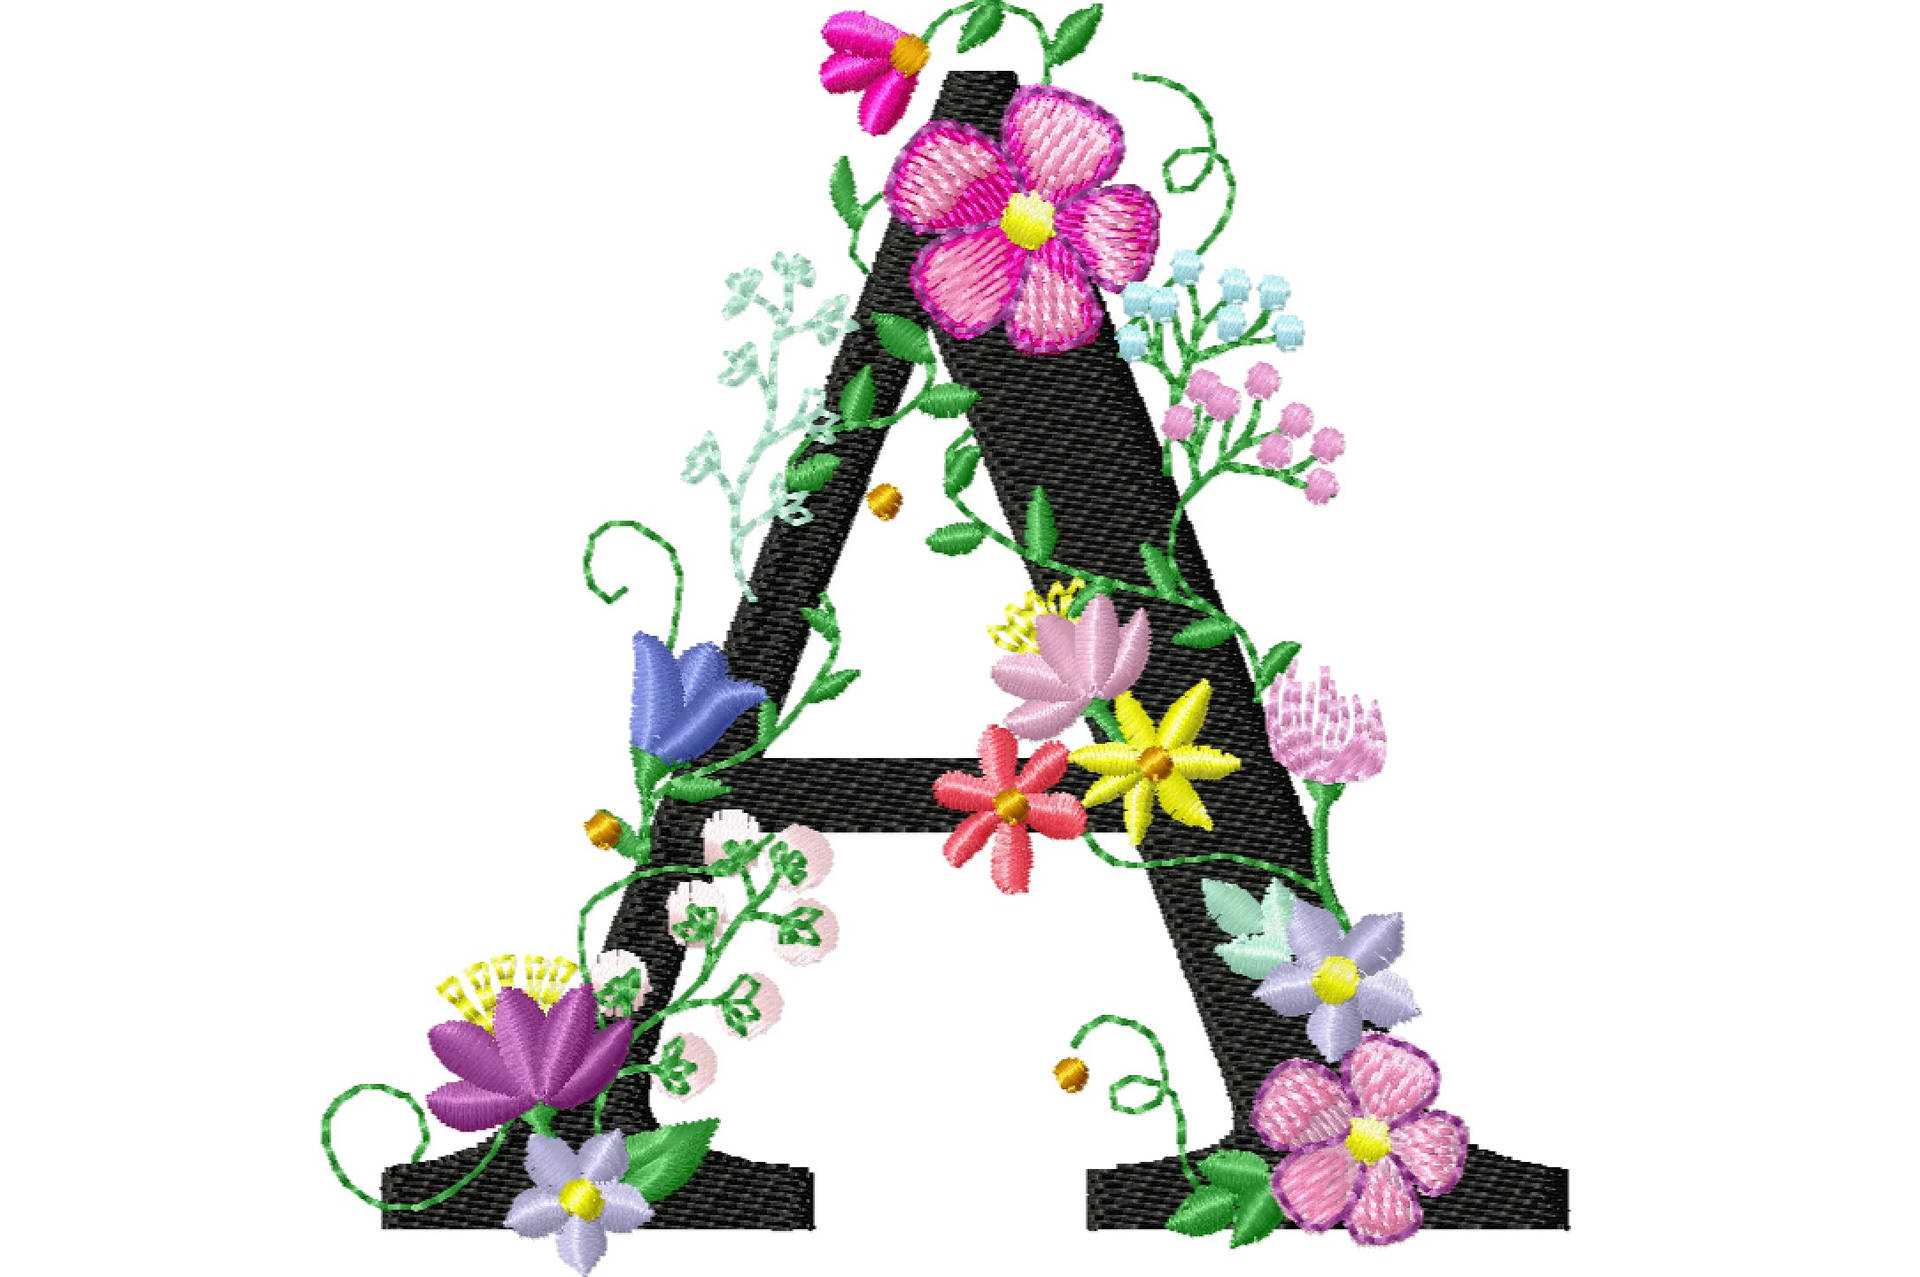 Embroidered Alphabet Letter A Wrapped With Cute And Colorful Flowers Background